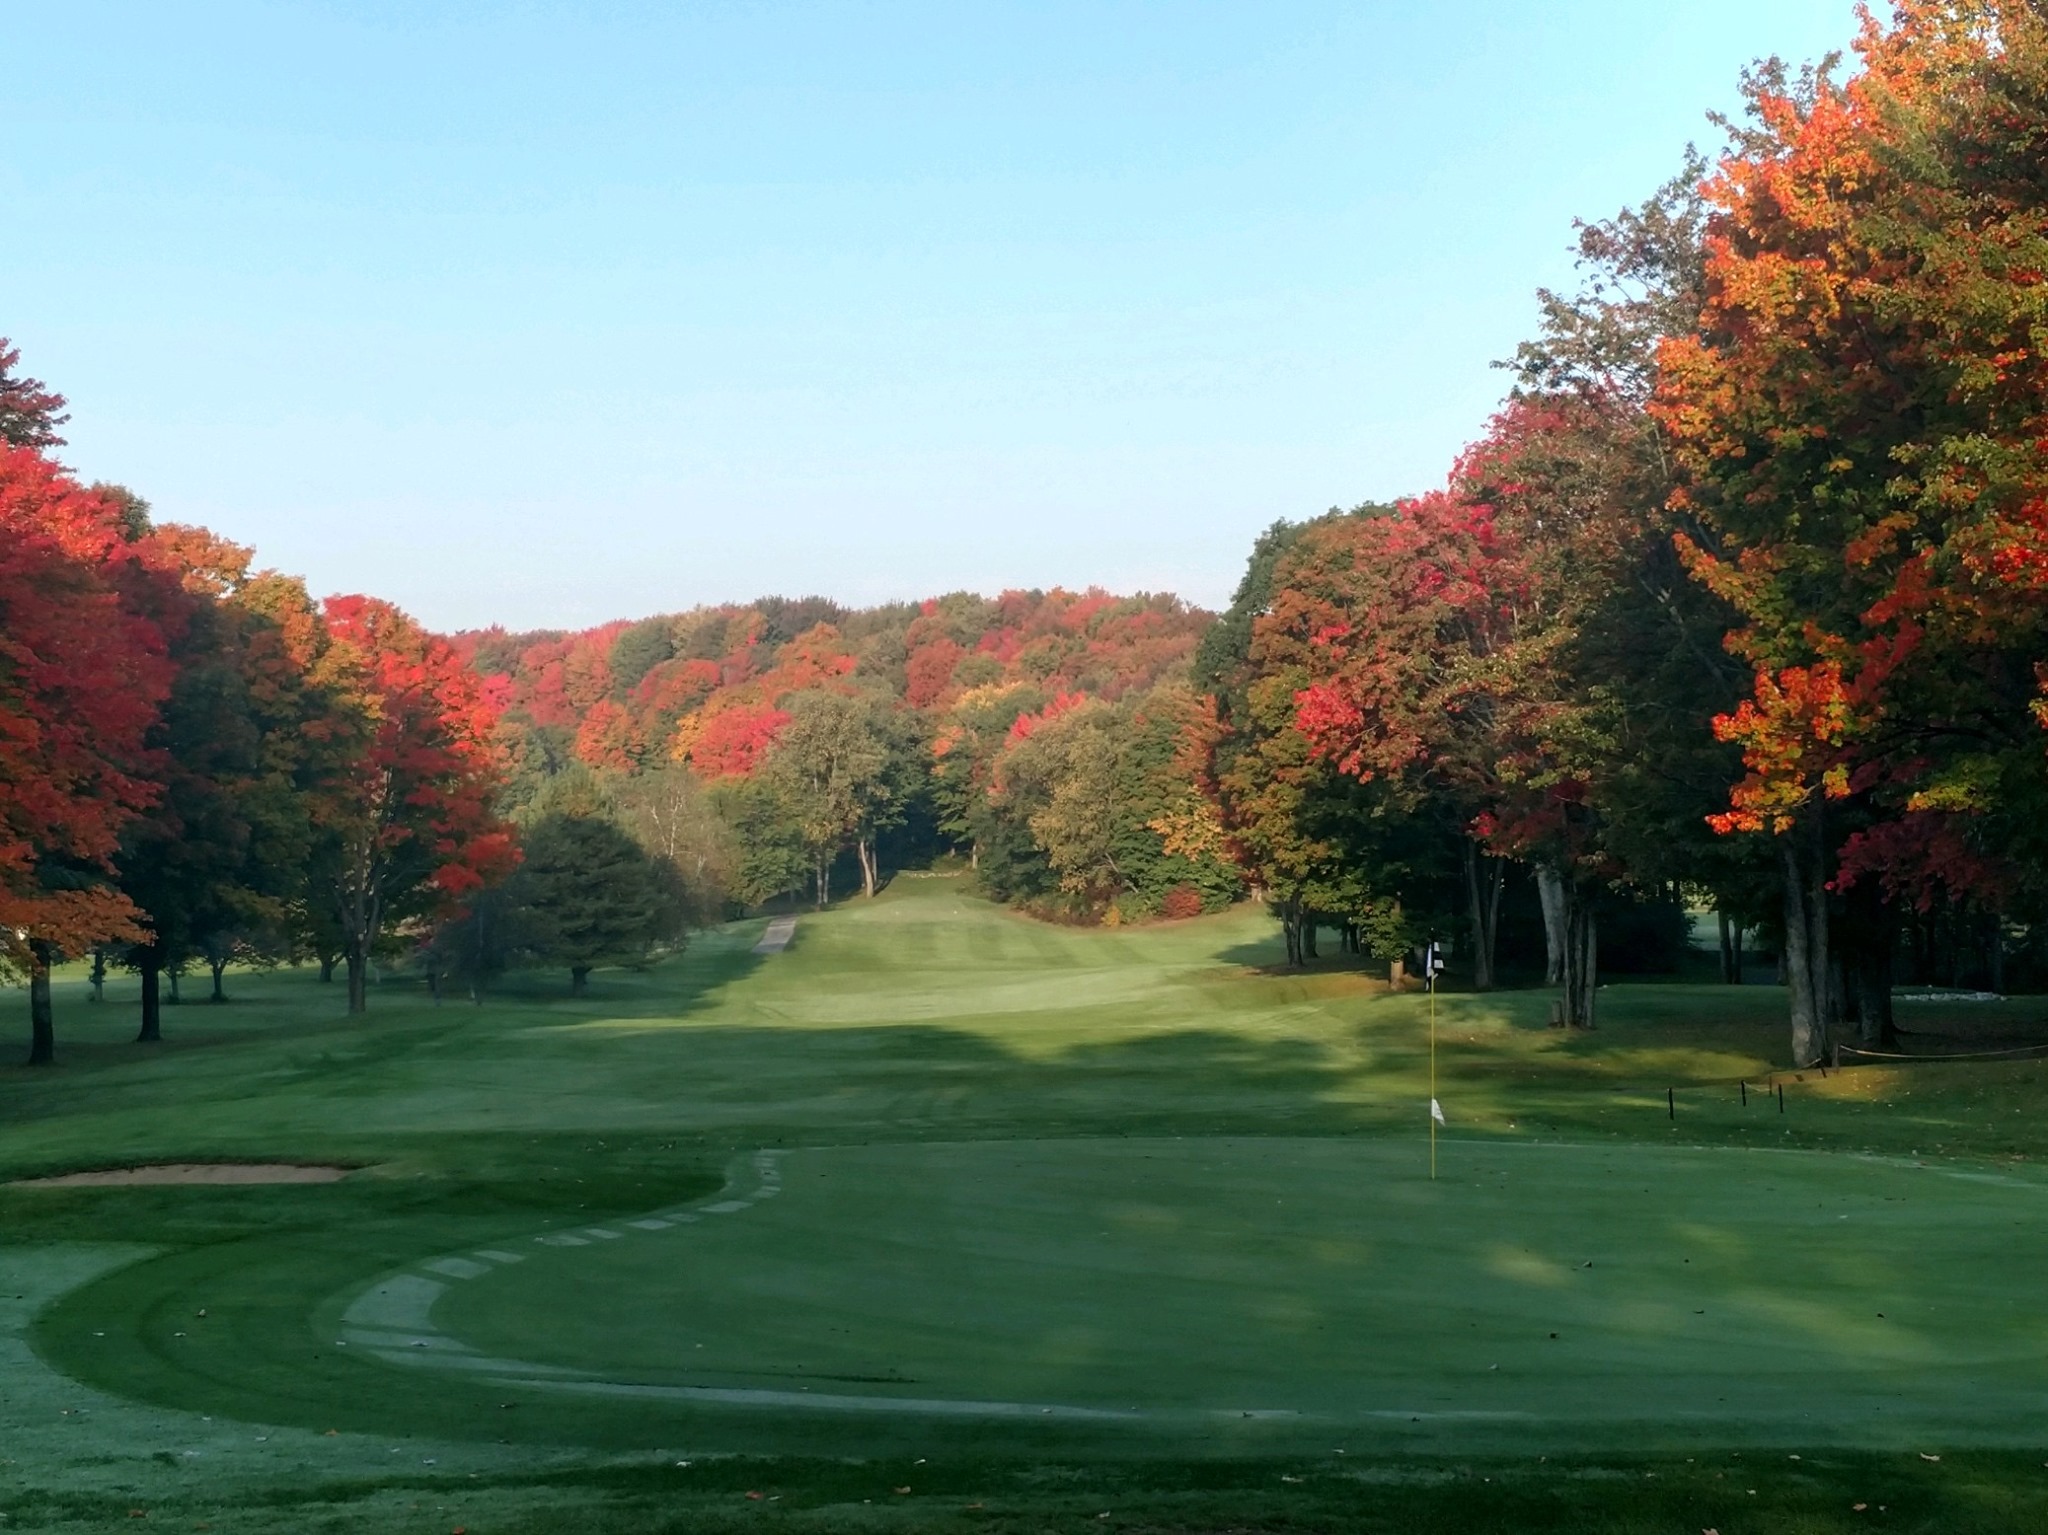 golf course fairway with autumn trees